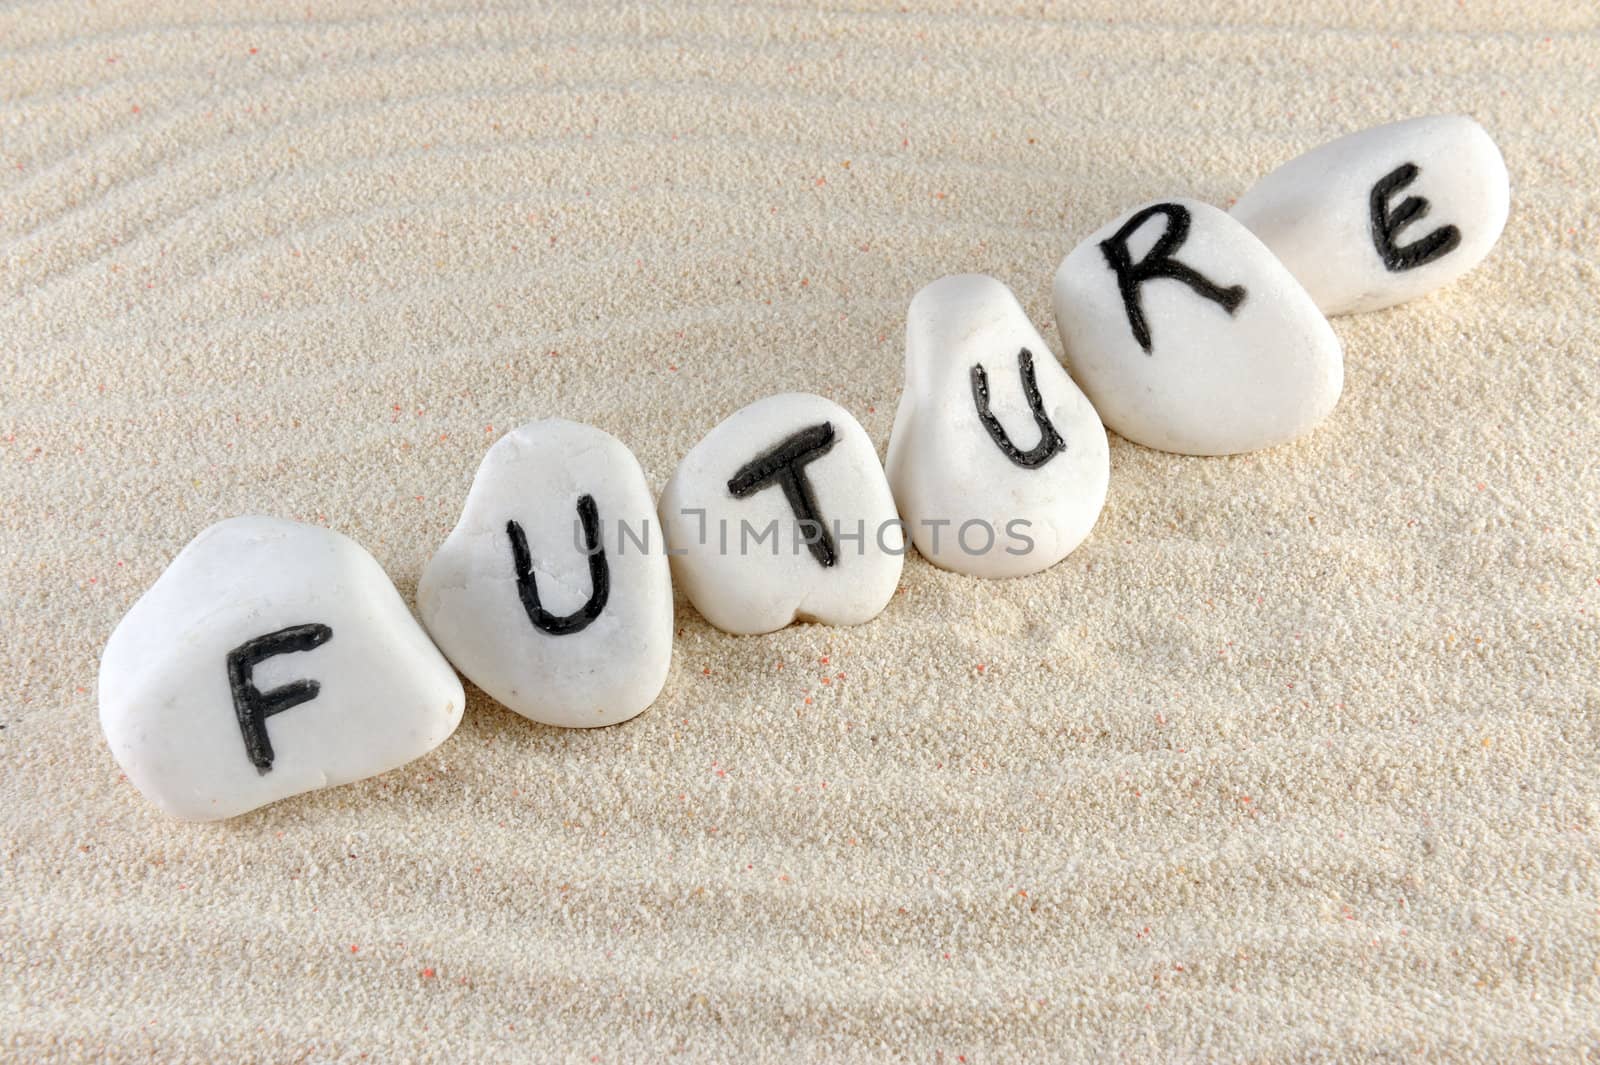 Future word on group of stones on the sand